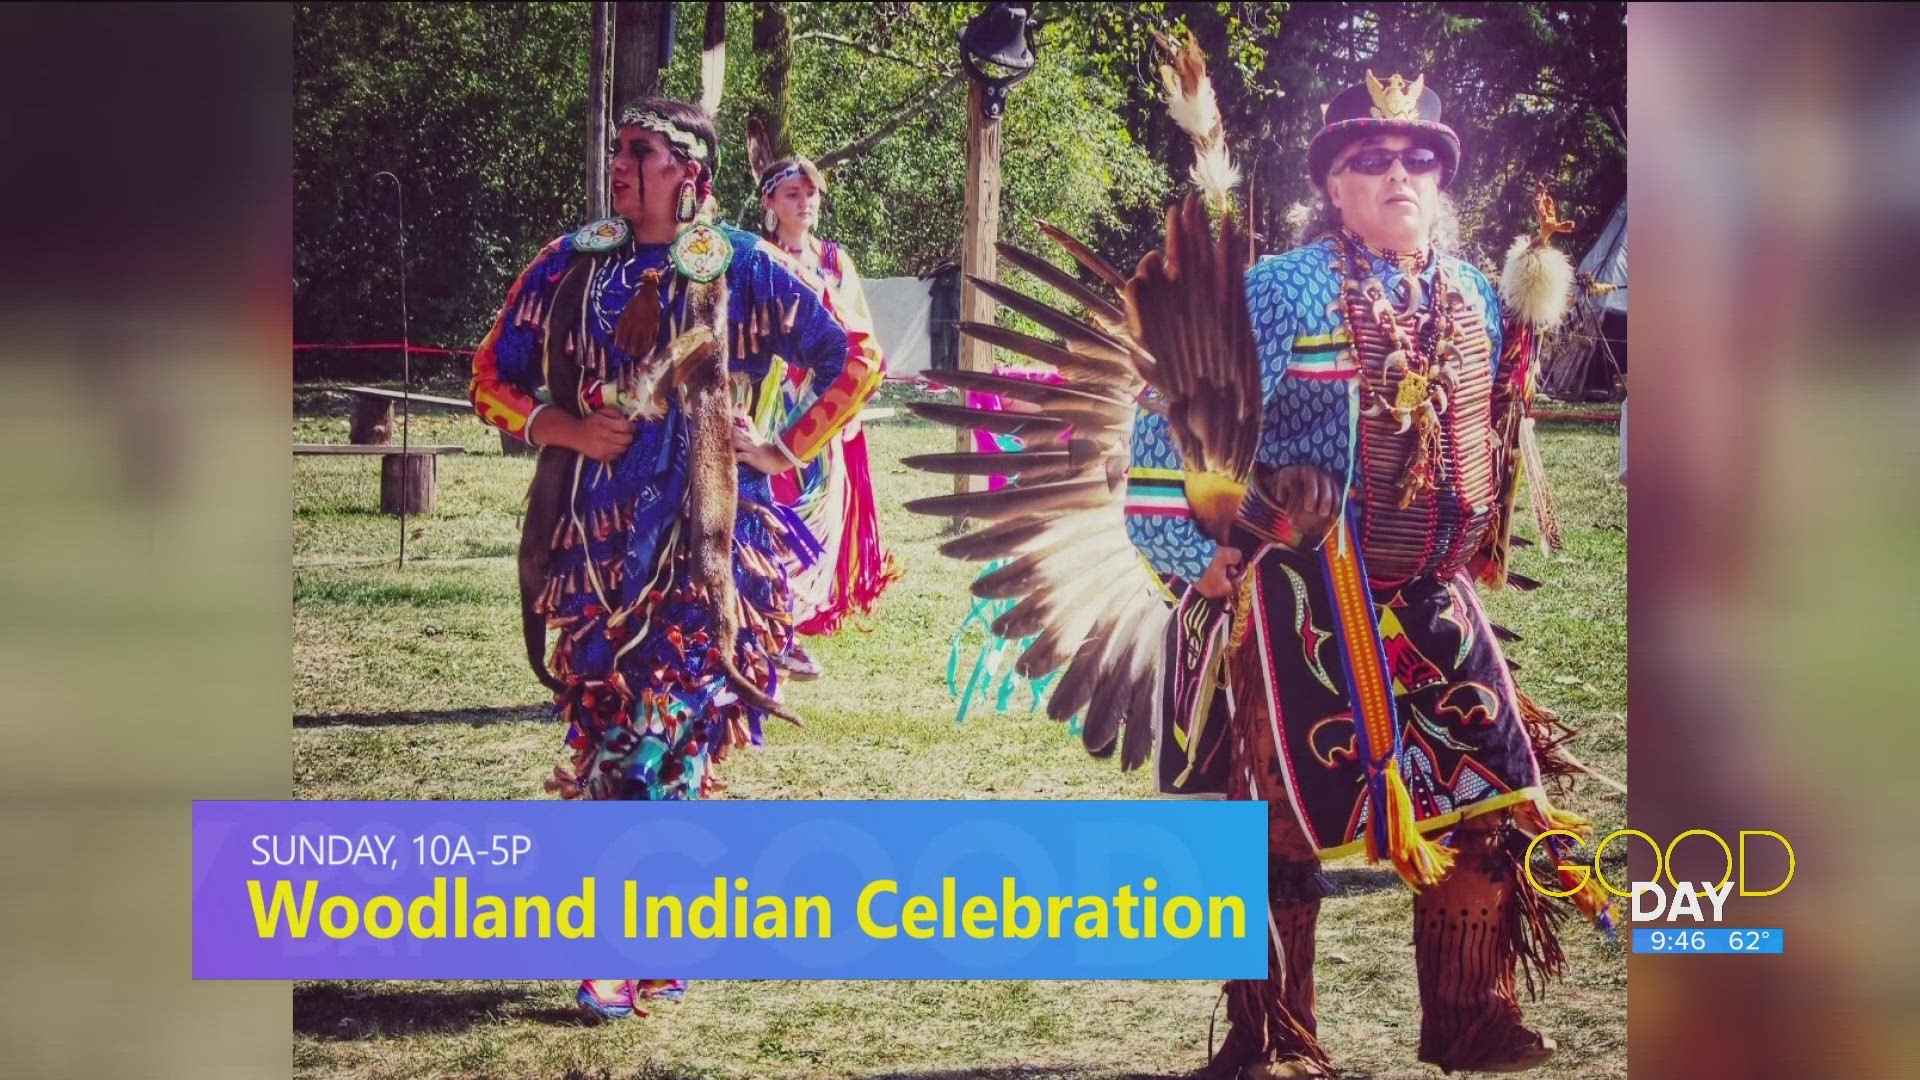 Martin Nagy from the Seven Eagles Historical Earth Center talks the importance of the Woodland Indian Celebration, an inter-Tribal event this weekend.